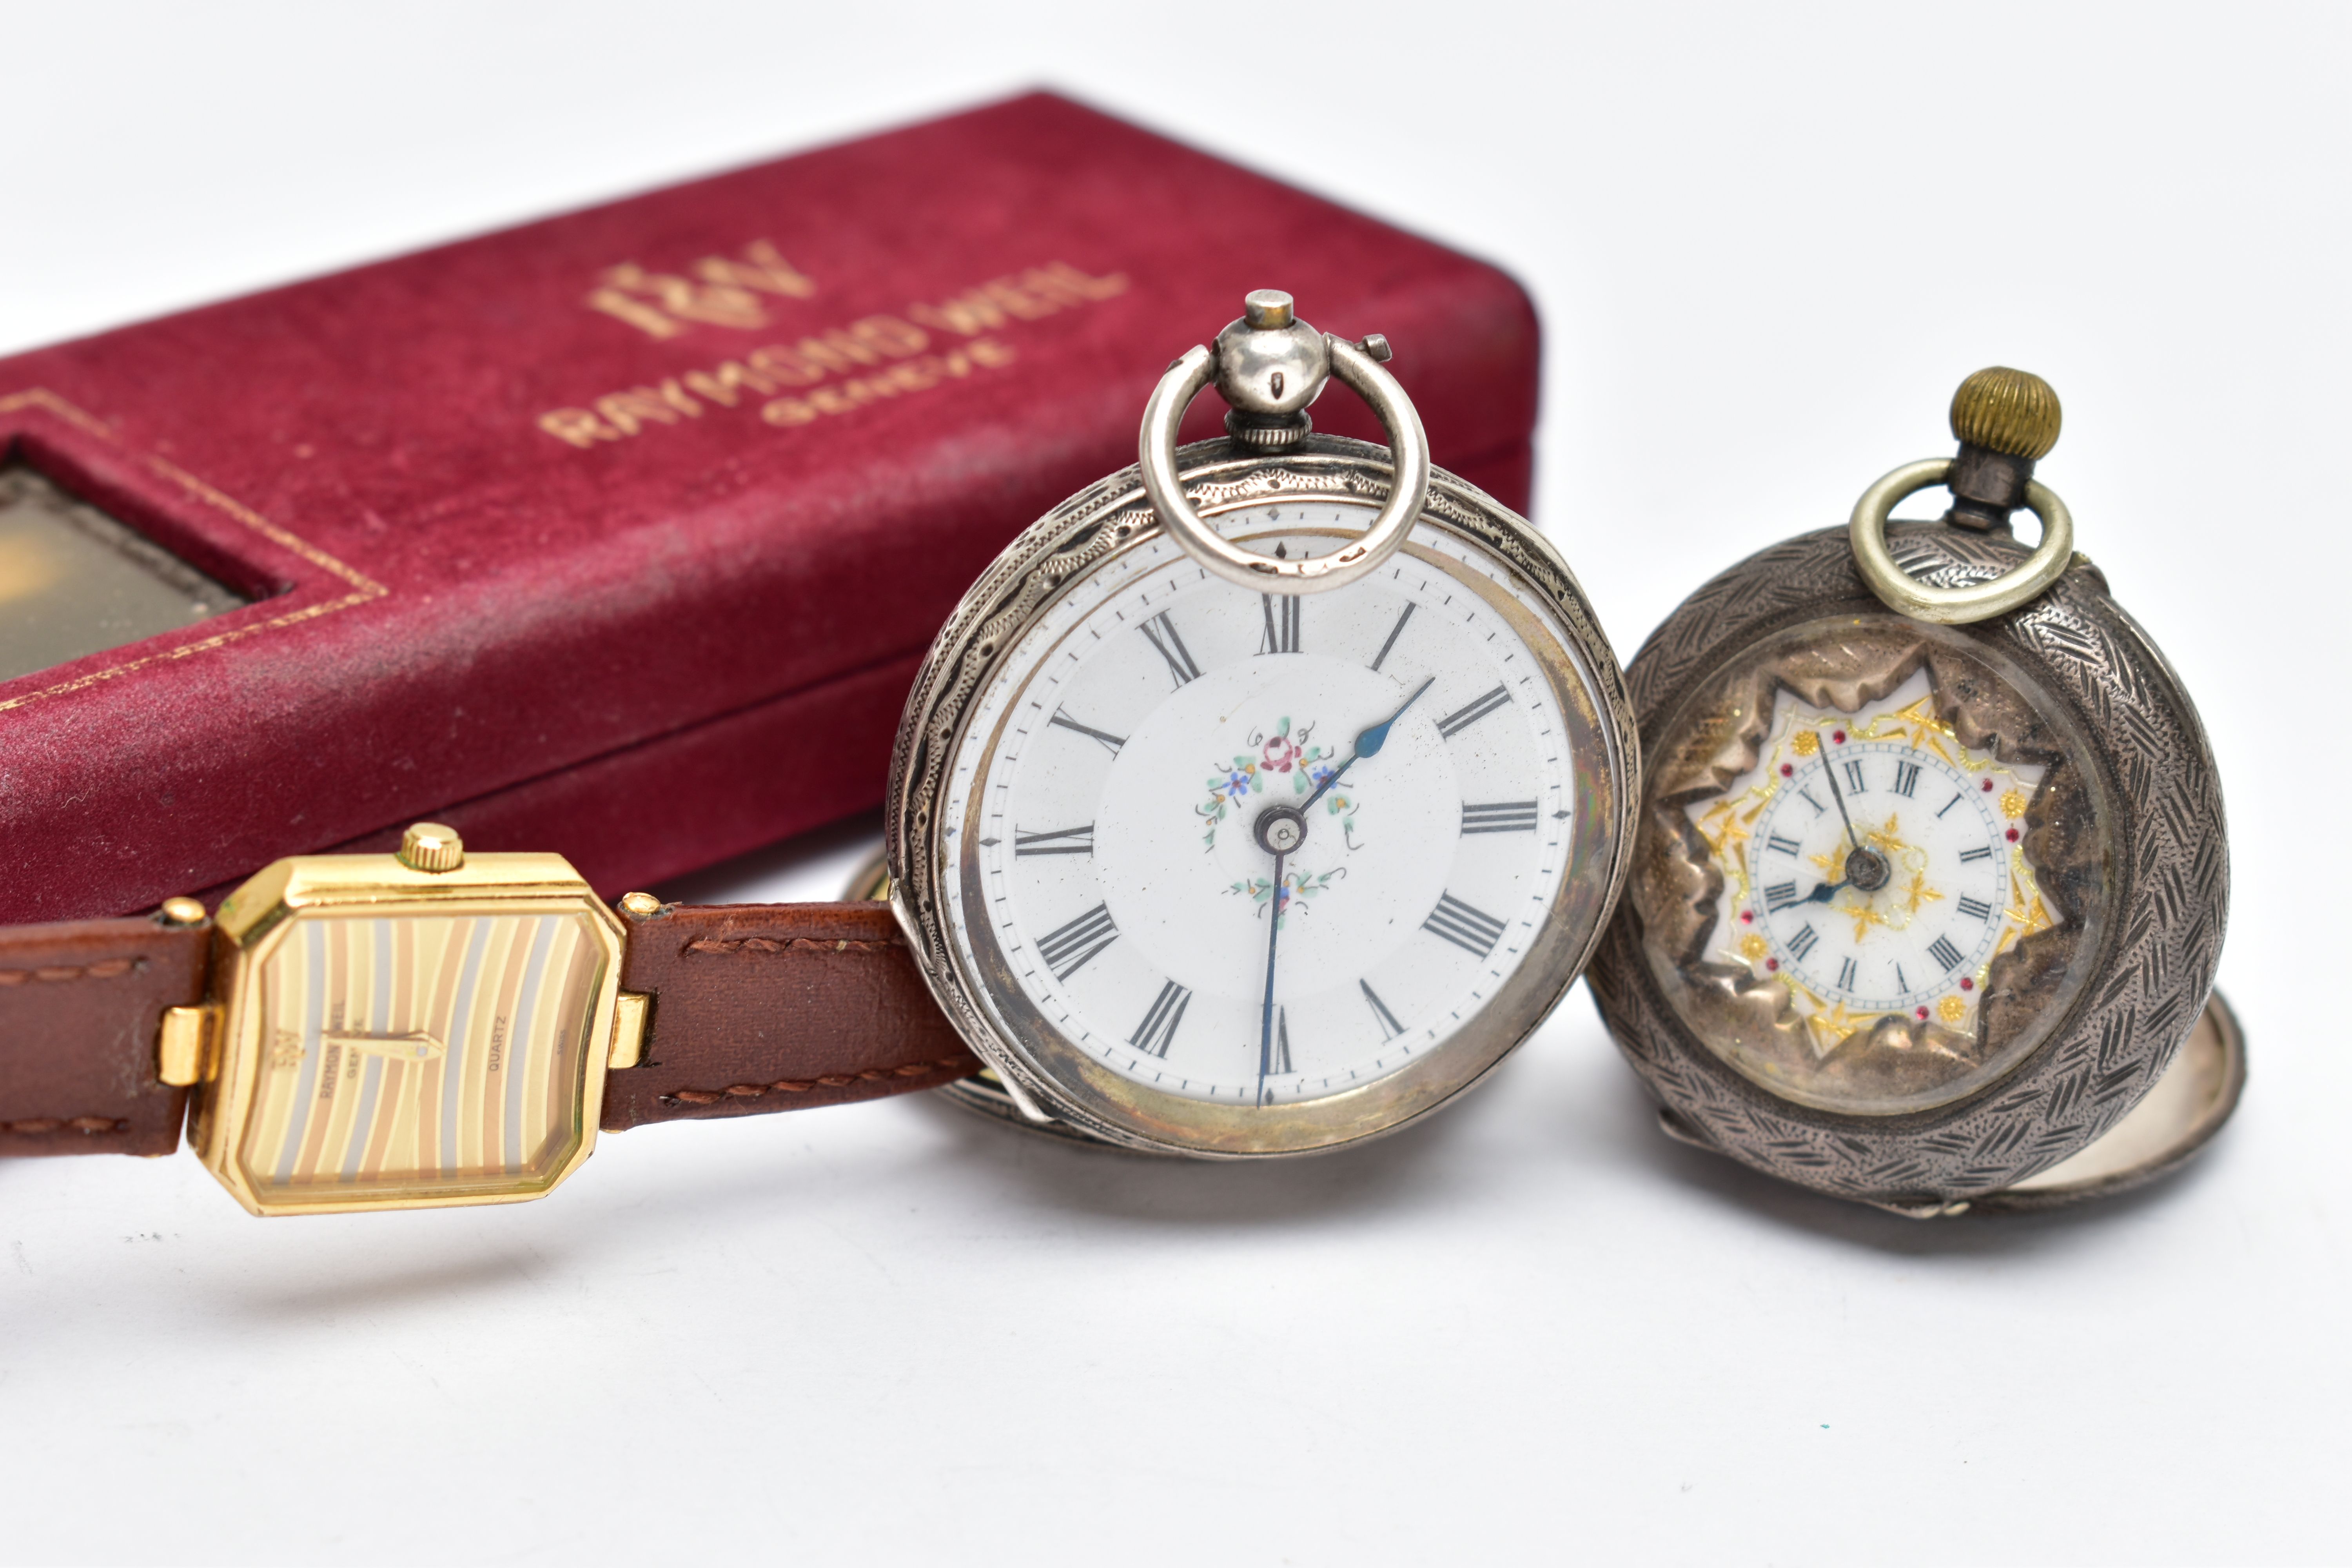 A 'RAYMOND WEIL' 18K GOLD PLATED WRISTWATCH AND TWO POCKET WATCHES, quartz movement, rectangular - Image 2 of 7